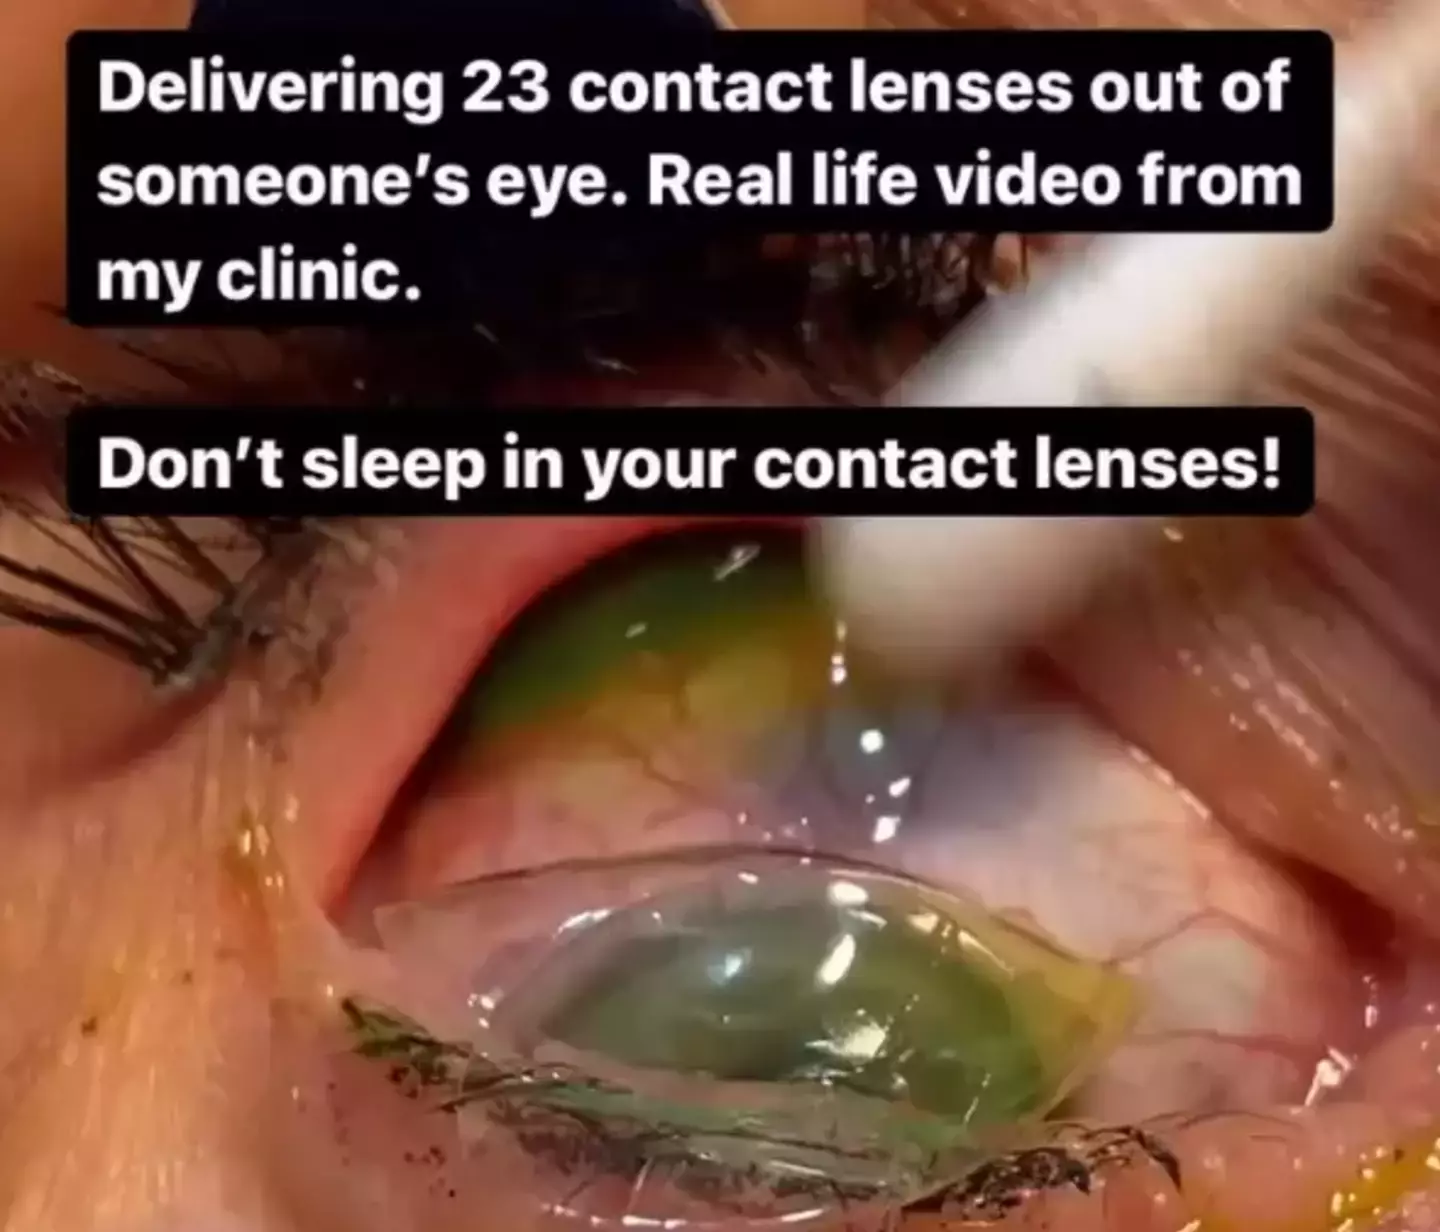 The patient went to bed with her contact lenses in on numerous occasions, causing a skin-crawling build up. (Instagram/@california_eye_associates)